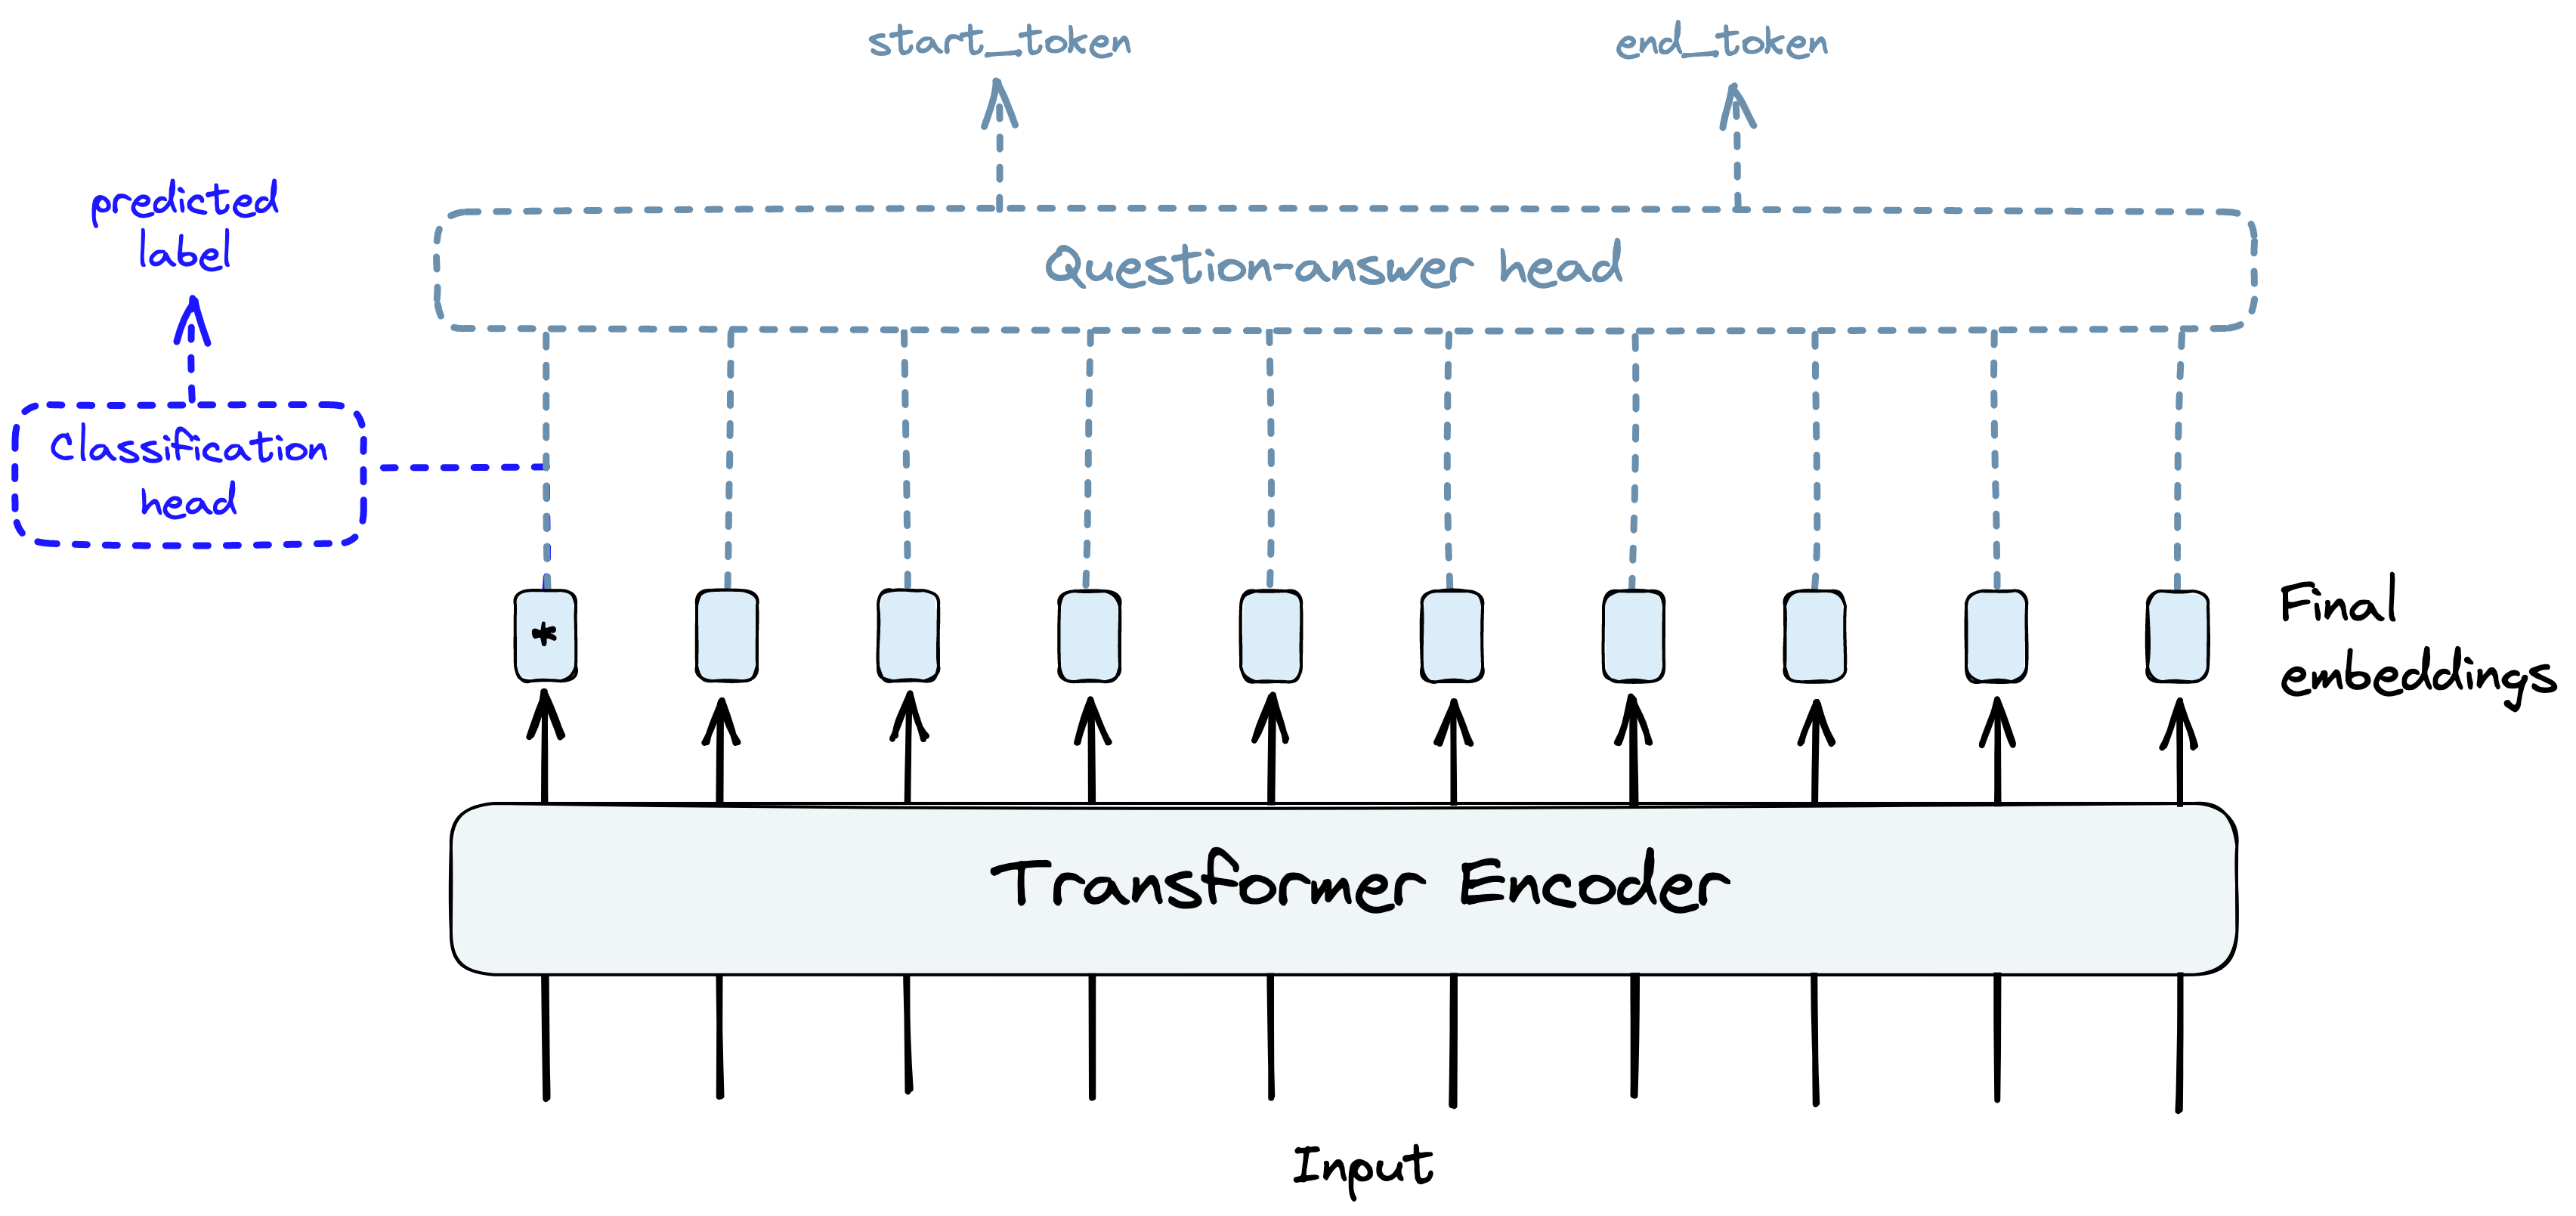 Transformers and the idea of transfer learning allowed us to reuse the same core components of pretrained transformer models for different tasks by switching model “heads” and performing fine-tuning.